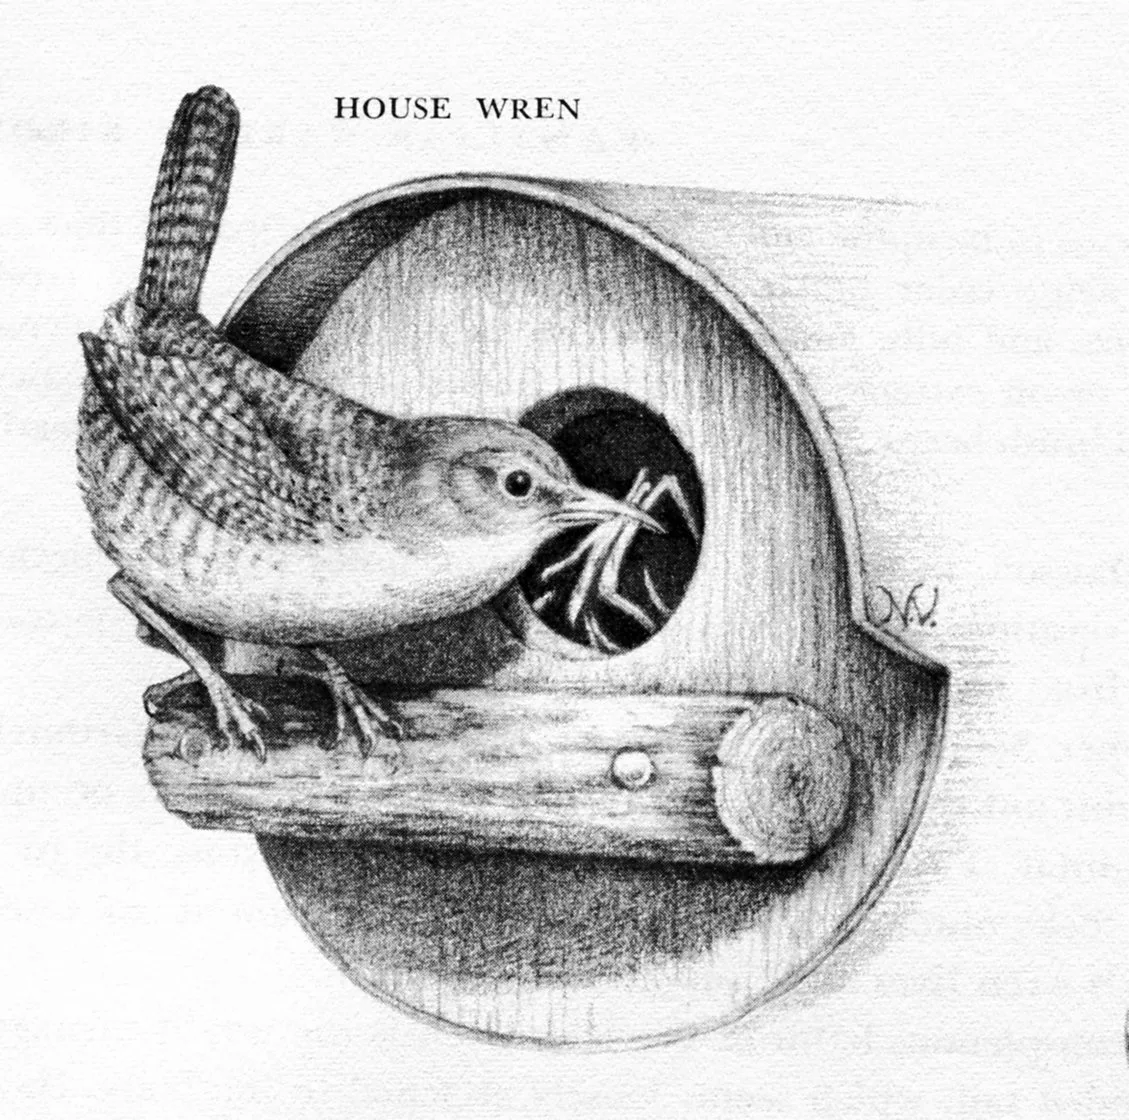 Vintage House Wren Image from Book - Hymns and Verses